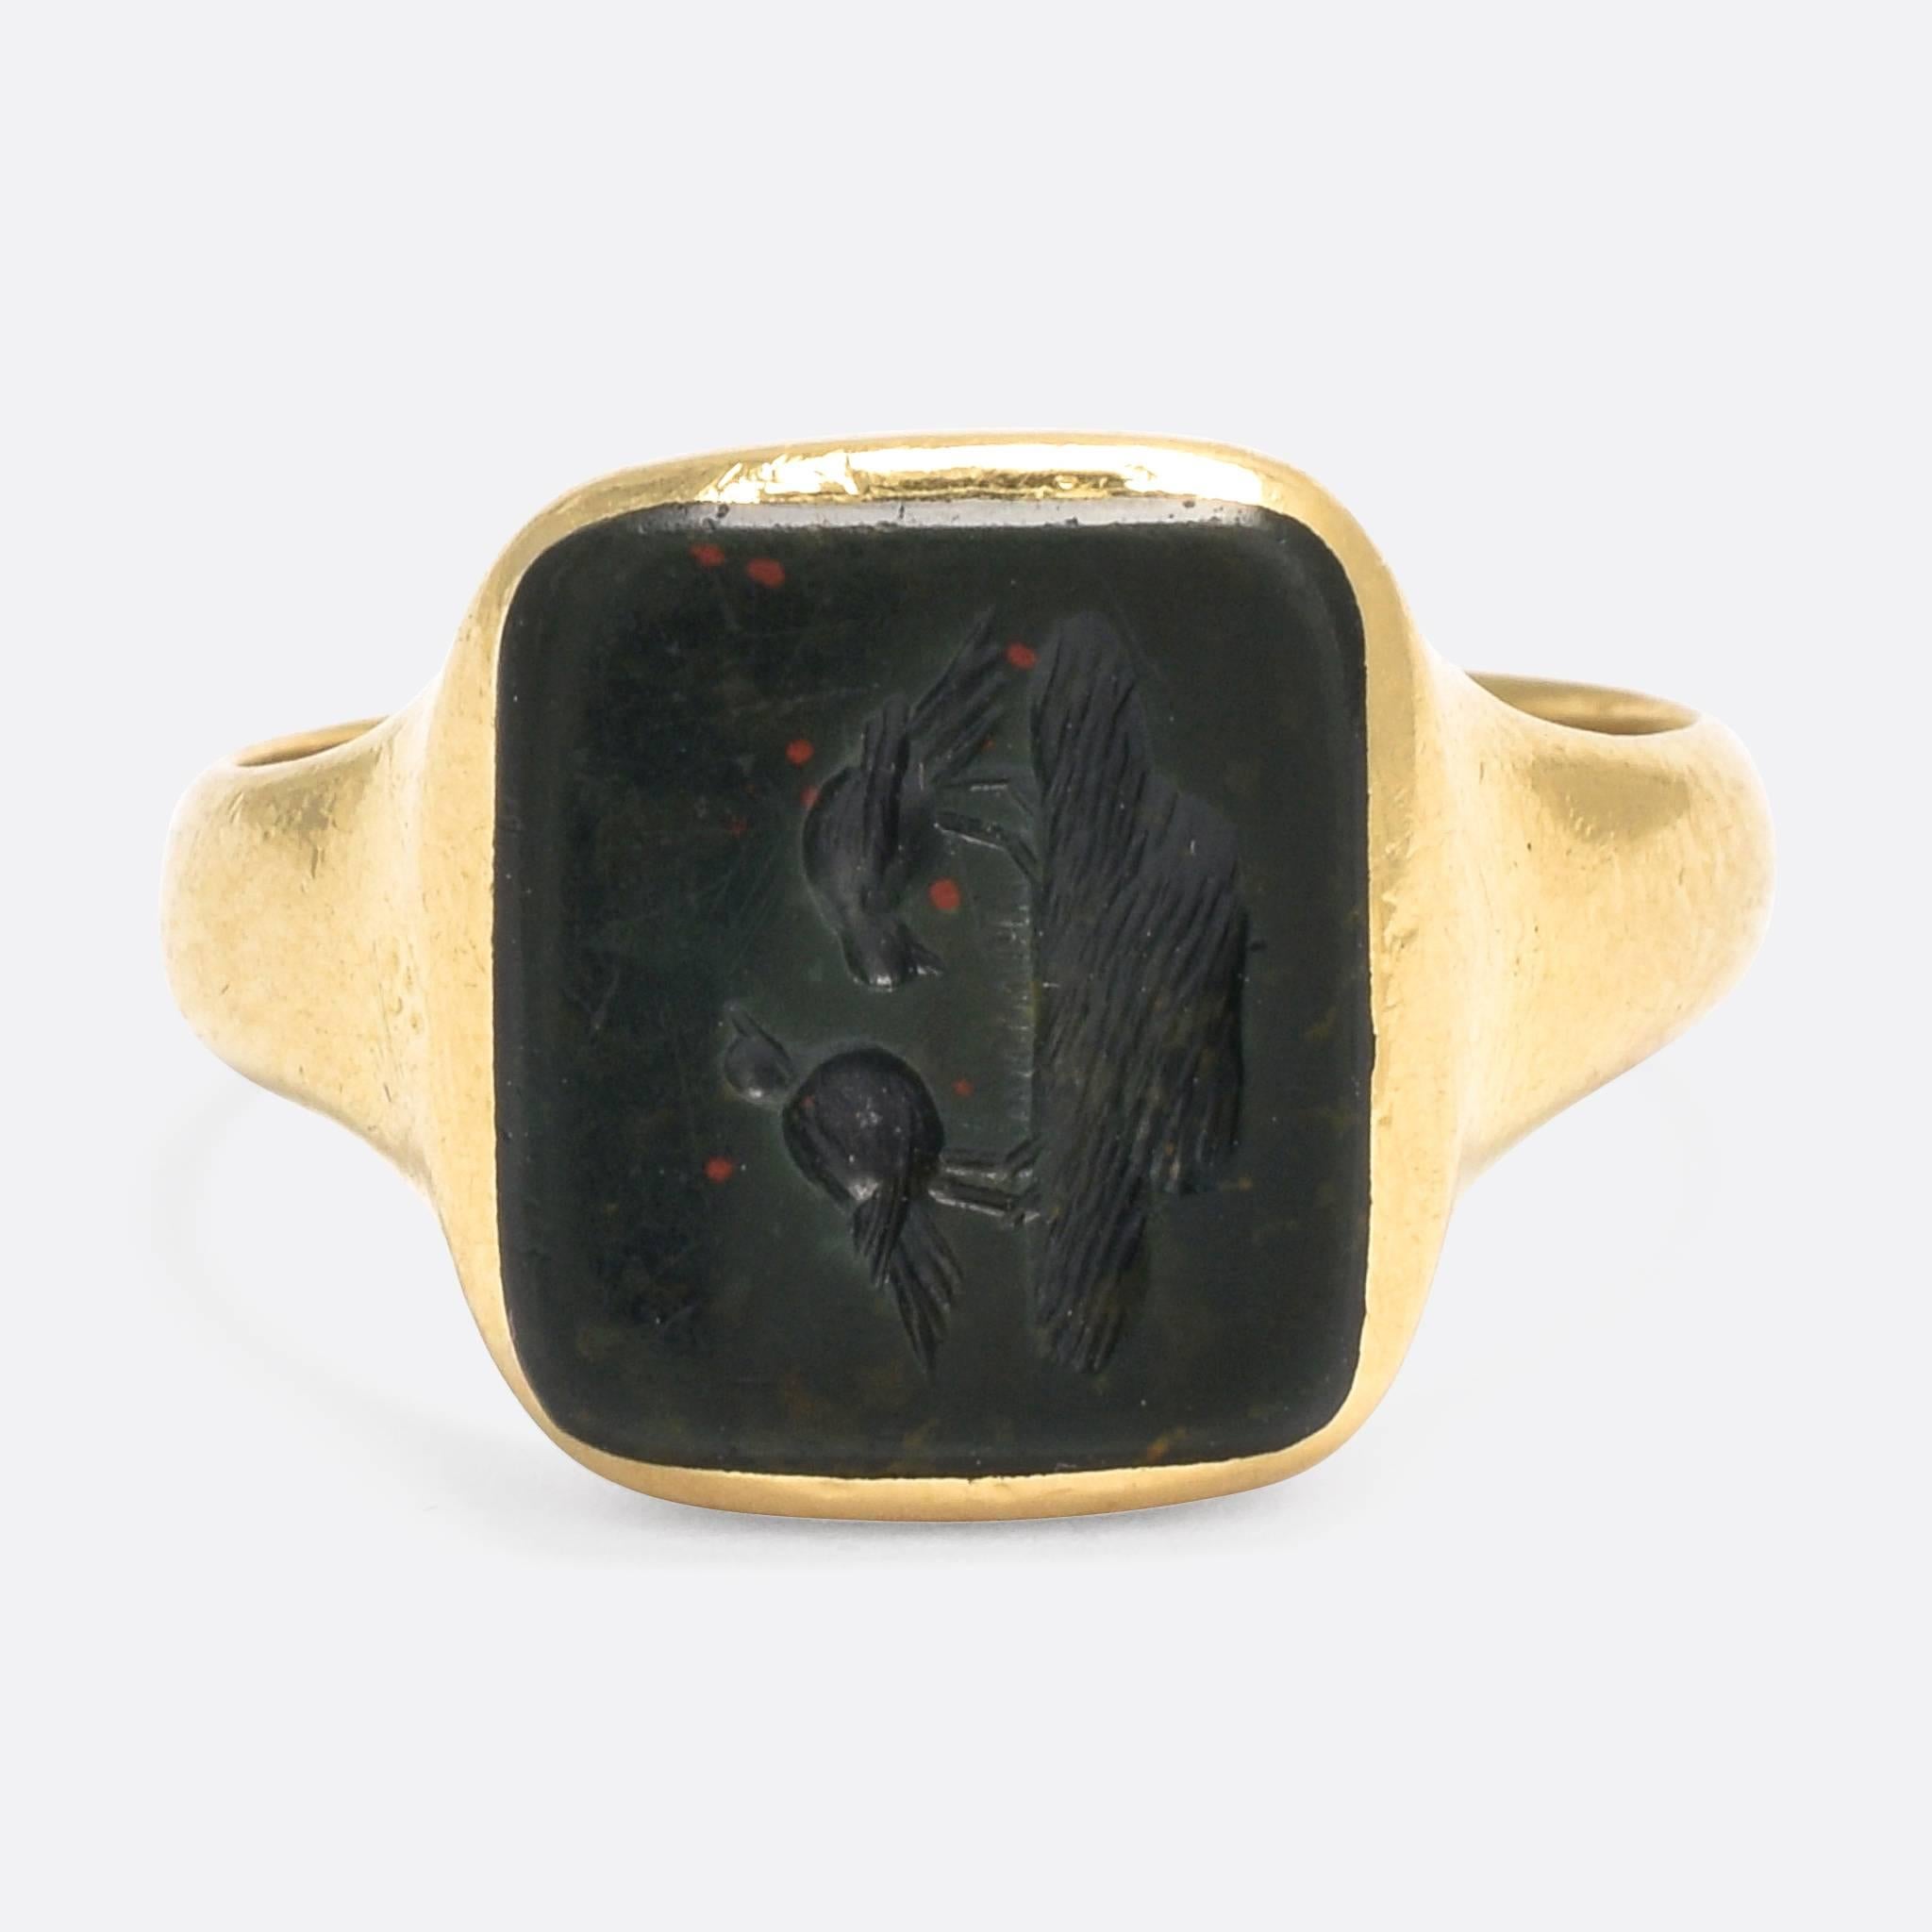 A cool and very unusual antique signet ring, set with a hand-carved bloodstone panel. The intaglio depicts two birds, bathing at a small pool of water... the detail is exceptional, and the subject is not the normal heraldry or monogram that we would